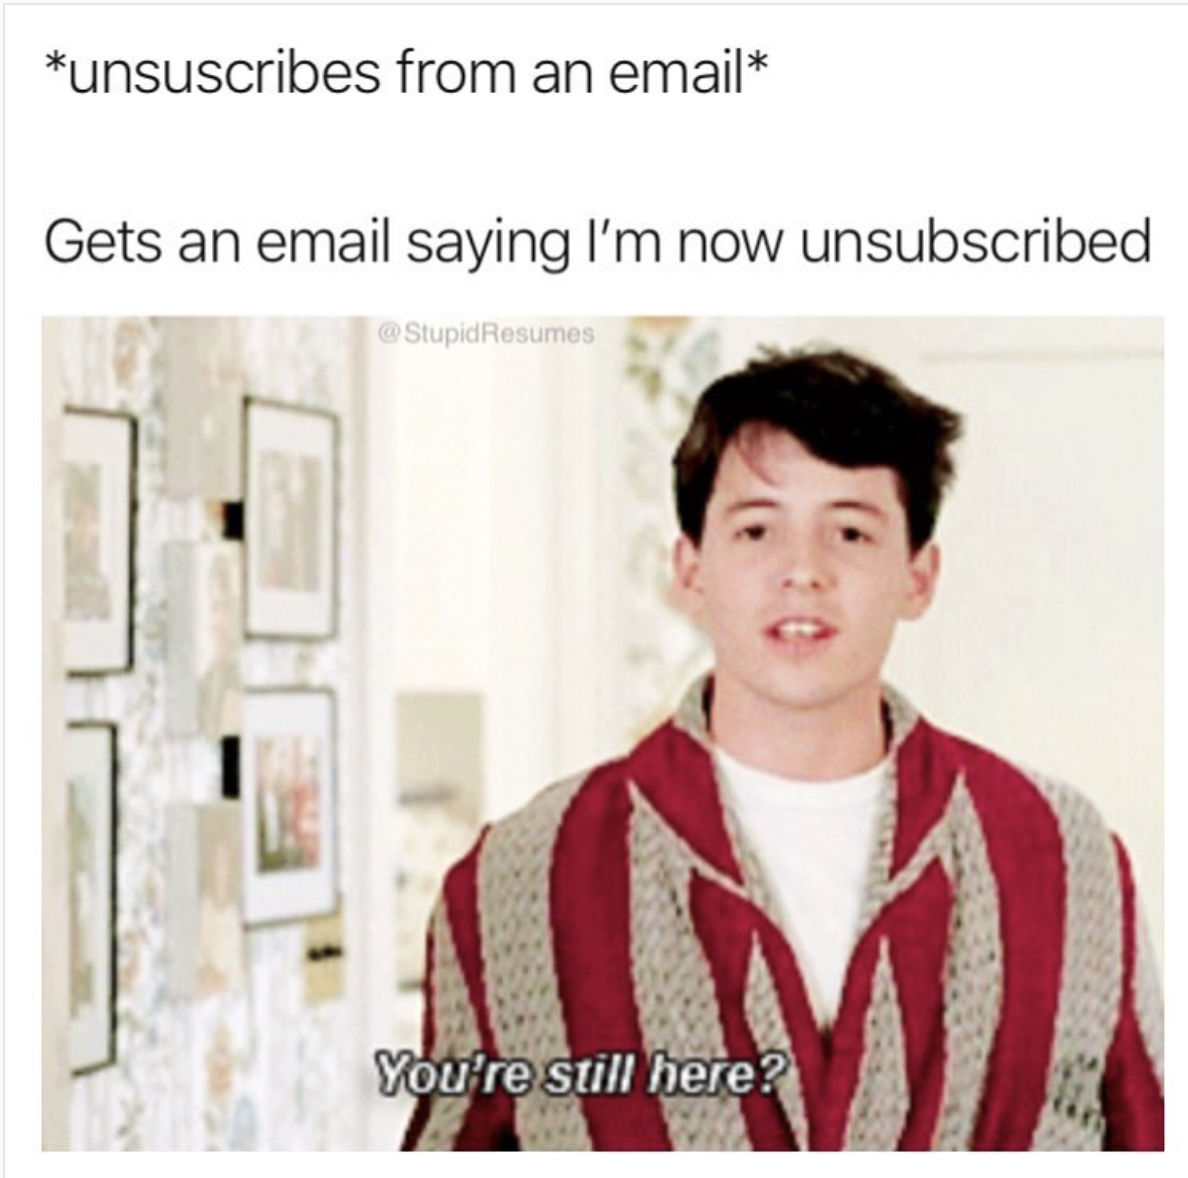 ferris bueller meme - unsuscribes from an email Gets an email saying I'm now unsubscribed Stupid Resumes You're still here?